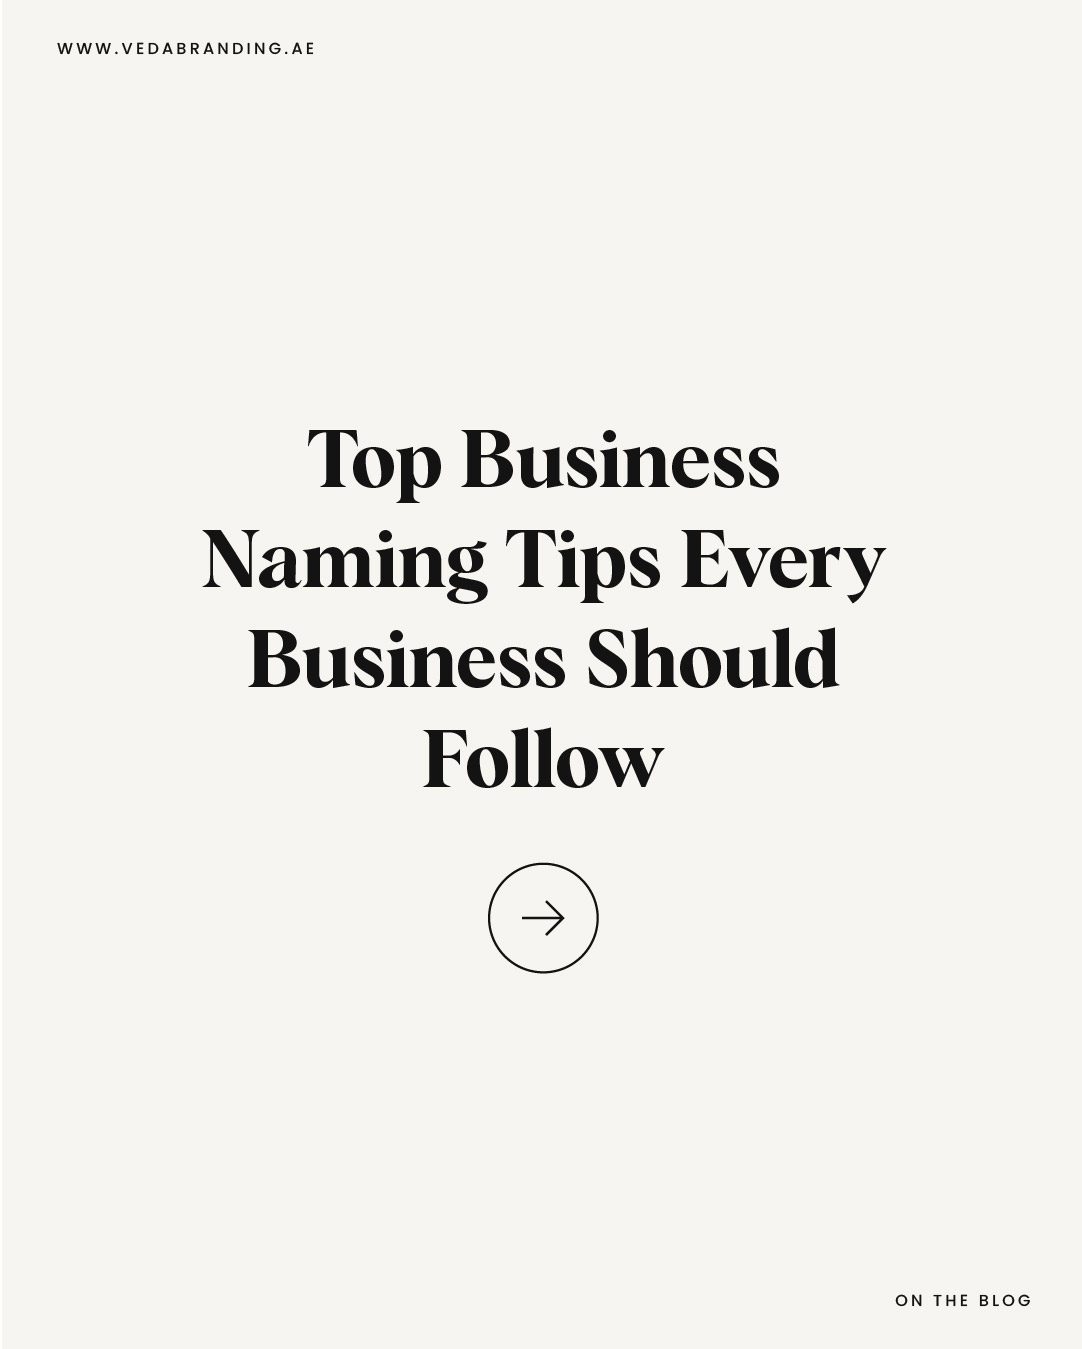 Top Business Naming Tips Every Business Should Follow